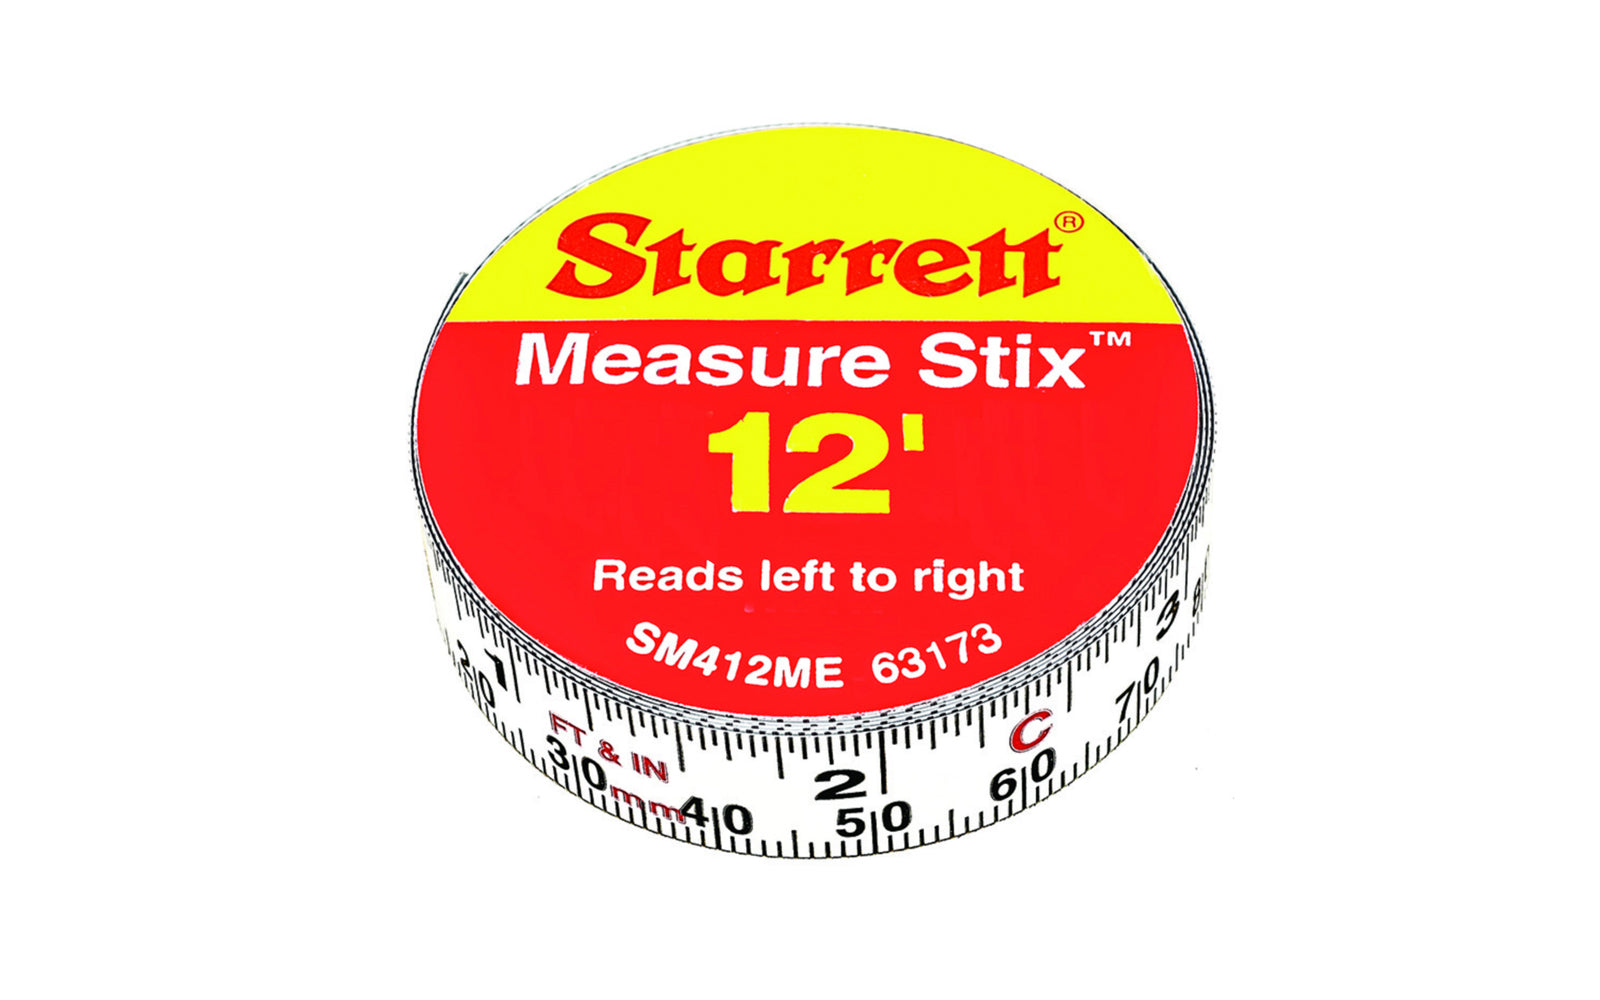 Starrett 4m - 12' Measure stix is manufactured with high quality precision steel. Produced with a permanent adhesive backing providing convenient, at-a-glance measurements. Can be mounted on work benches, saw tables, drafting tables, and more. The stix easily cut to proper size with scissors. Reads with left to right.